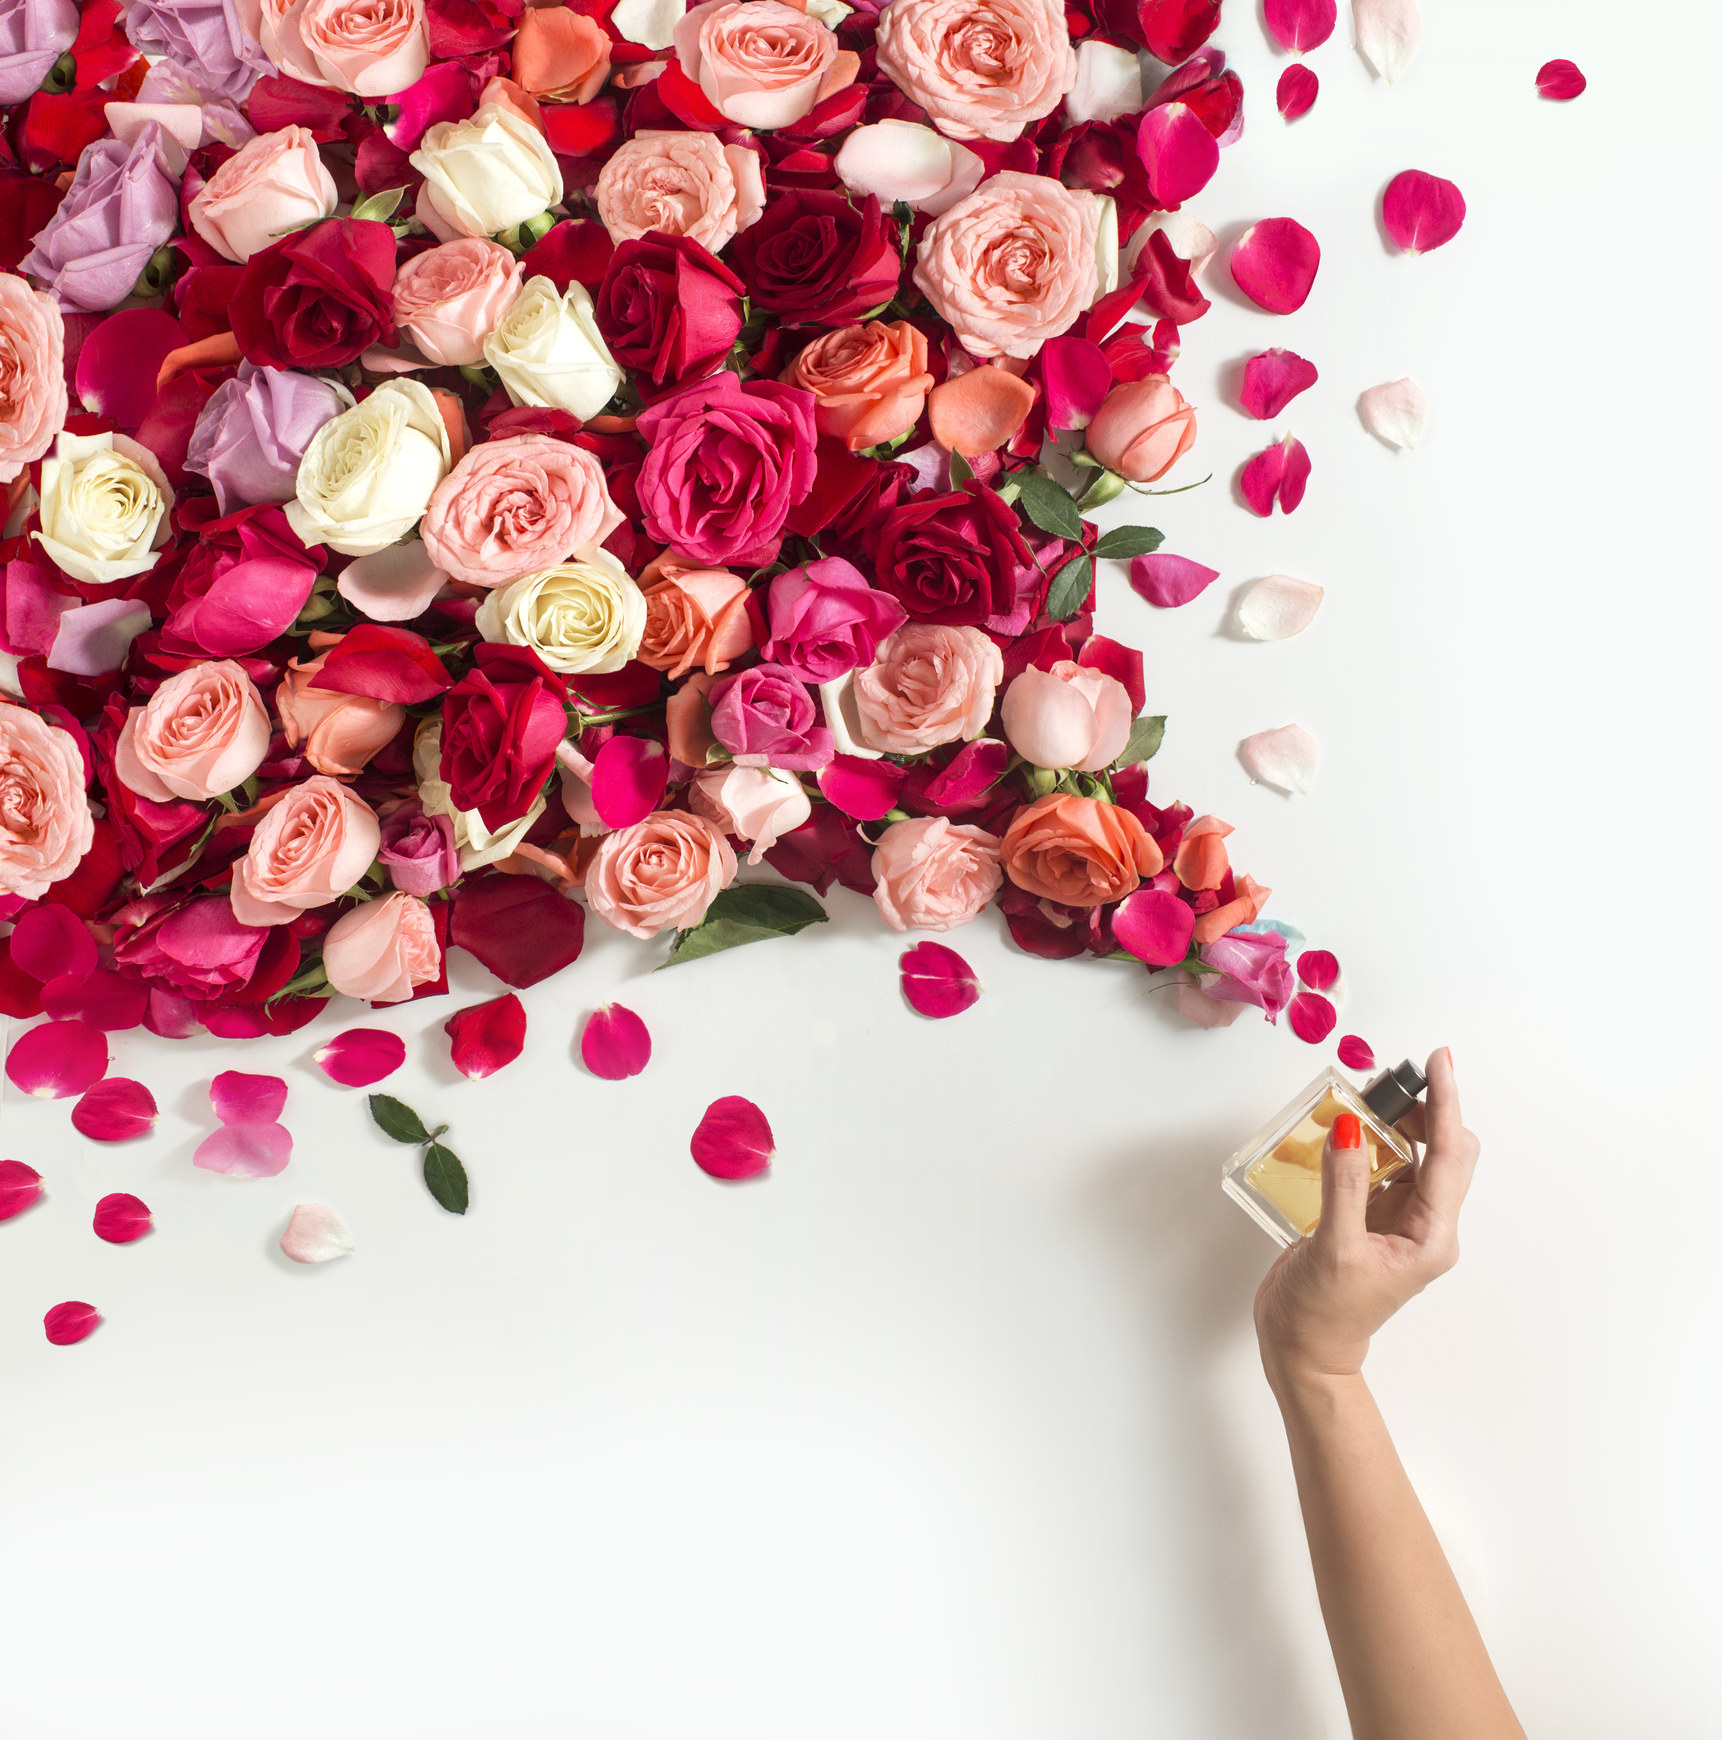 hand spraying perfume into a pile of roses